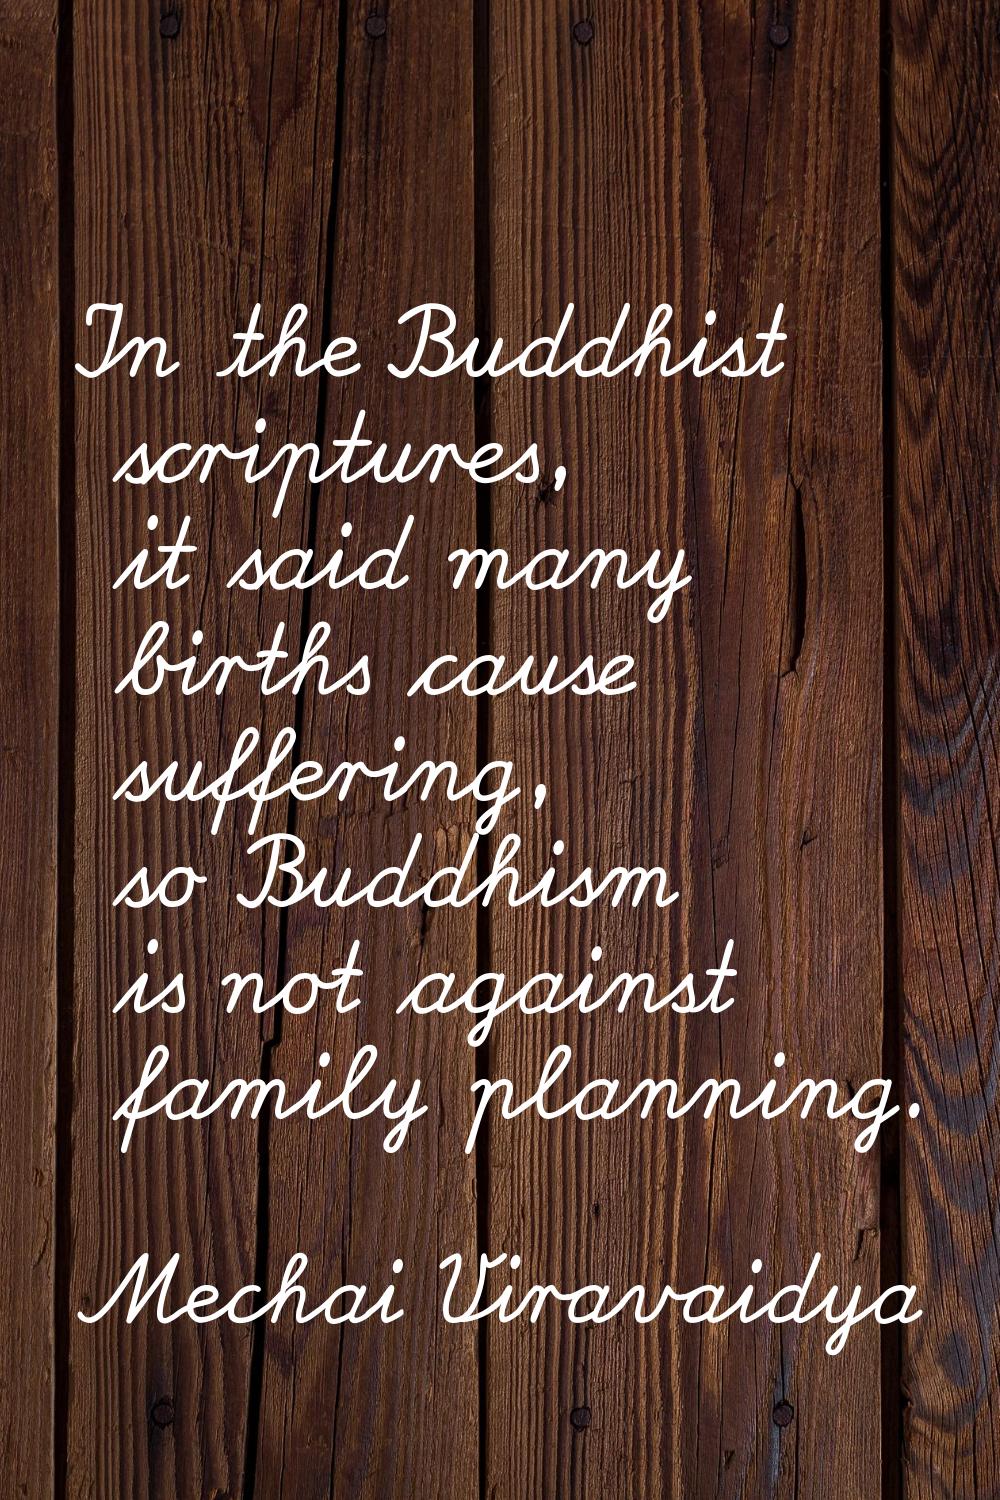 In the Buddhist scriptures, it said many births cause suffering, so Buddhism is not against family 